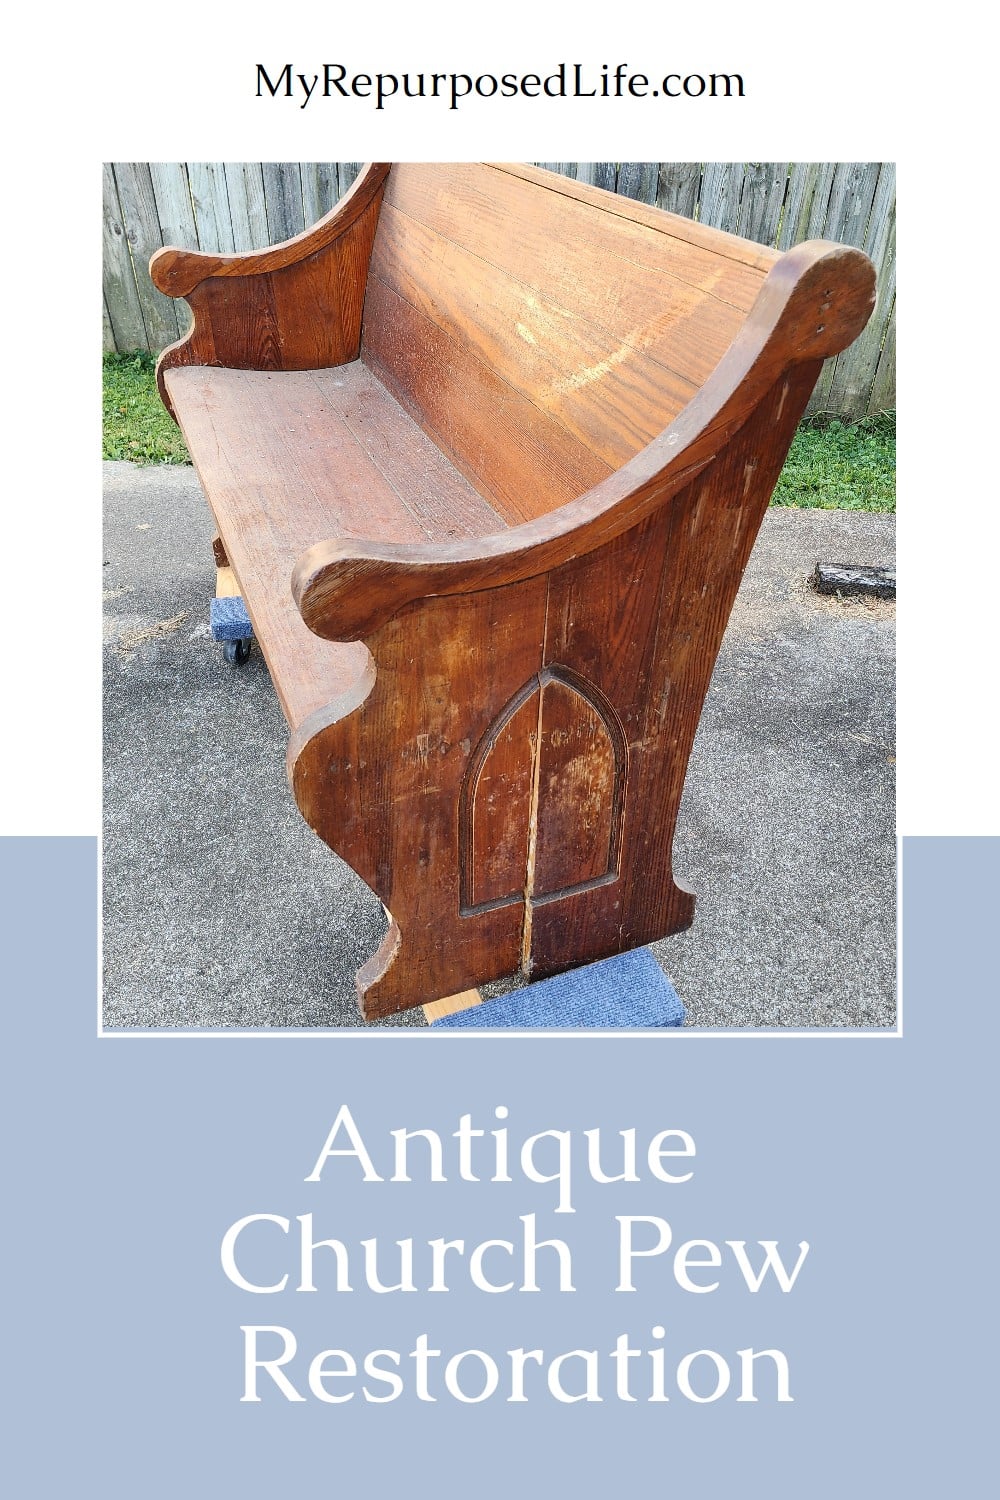 A small antique church pew longs to turn back the hands of time. Follow along as things go terribly wrong before she has her beauty restored. via @repurposedlife